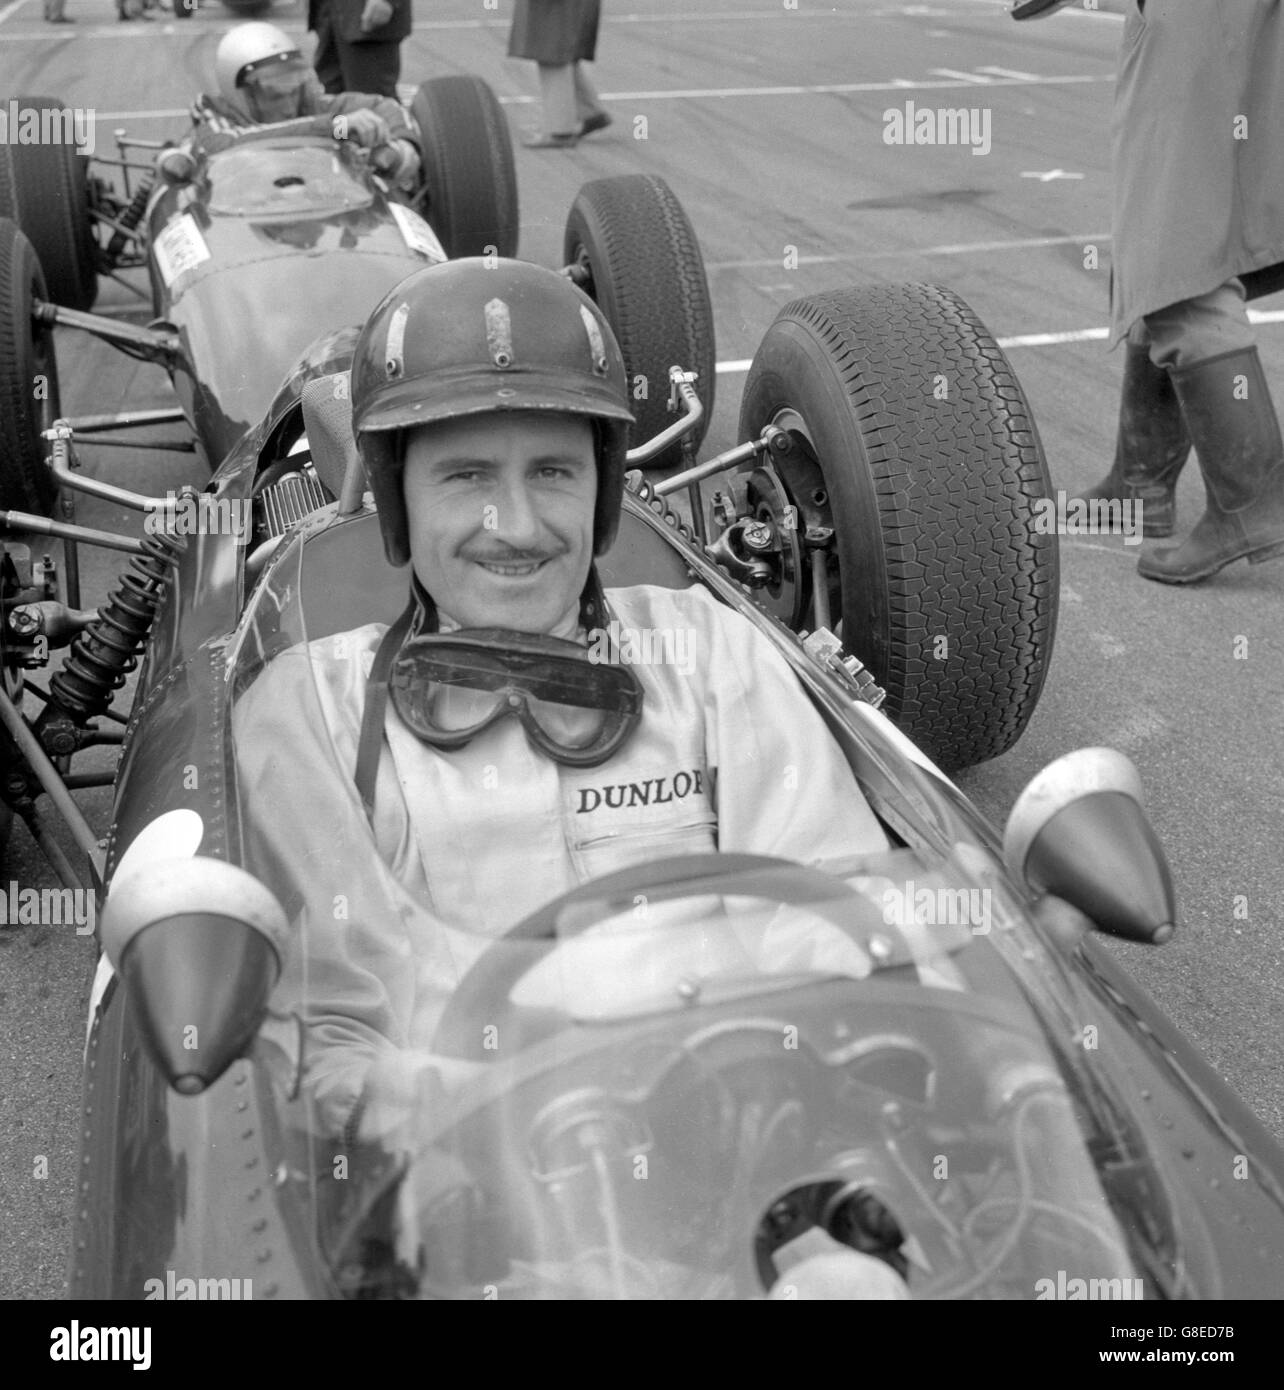 Motor Racing - Formula One - Graham Hill. British driver Graham Hill (BRM), who finished second to Jack Brabham in the recent Dutch Grand Prix. Stock Photo